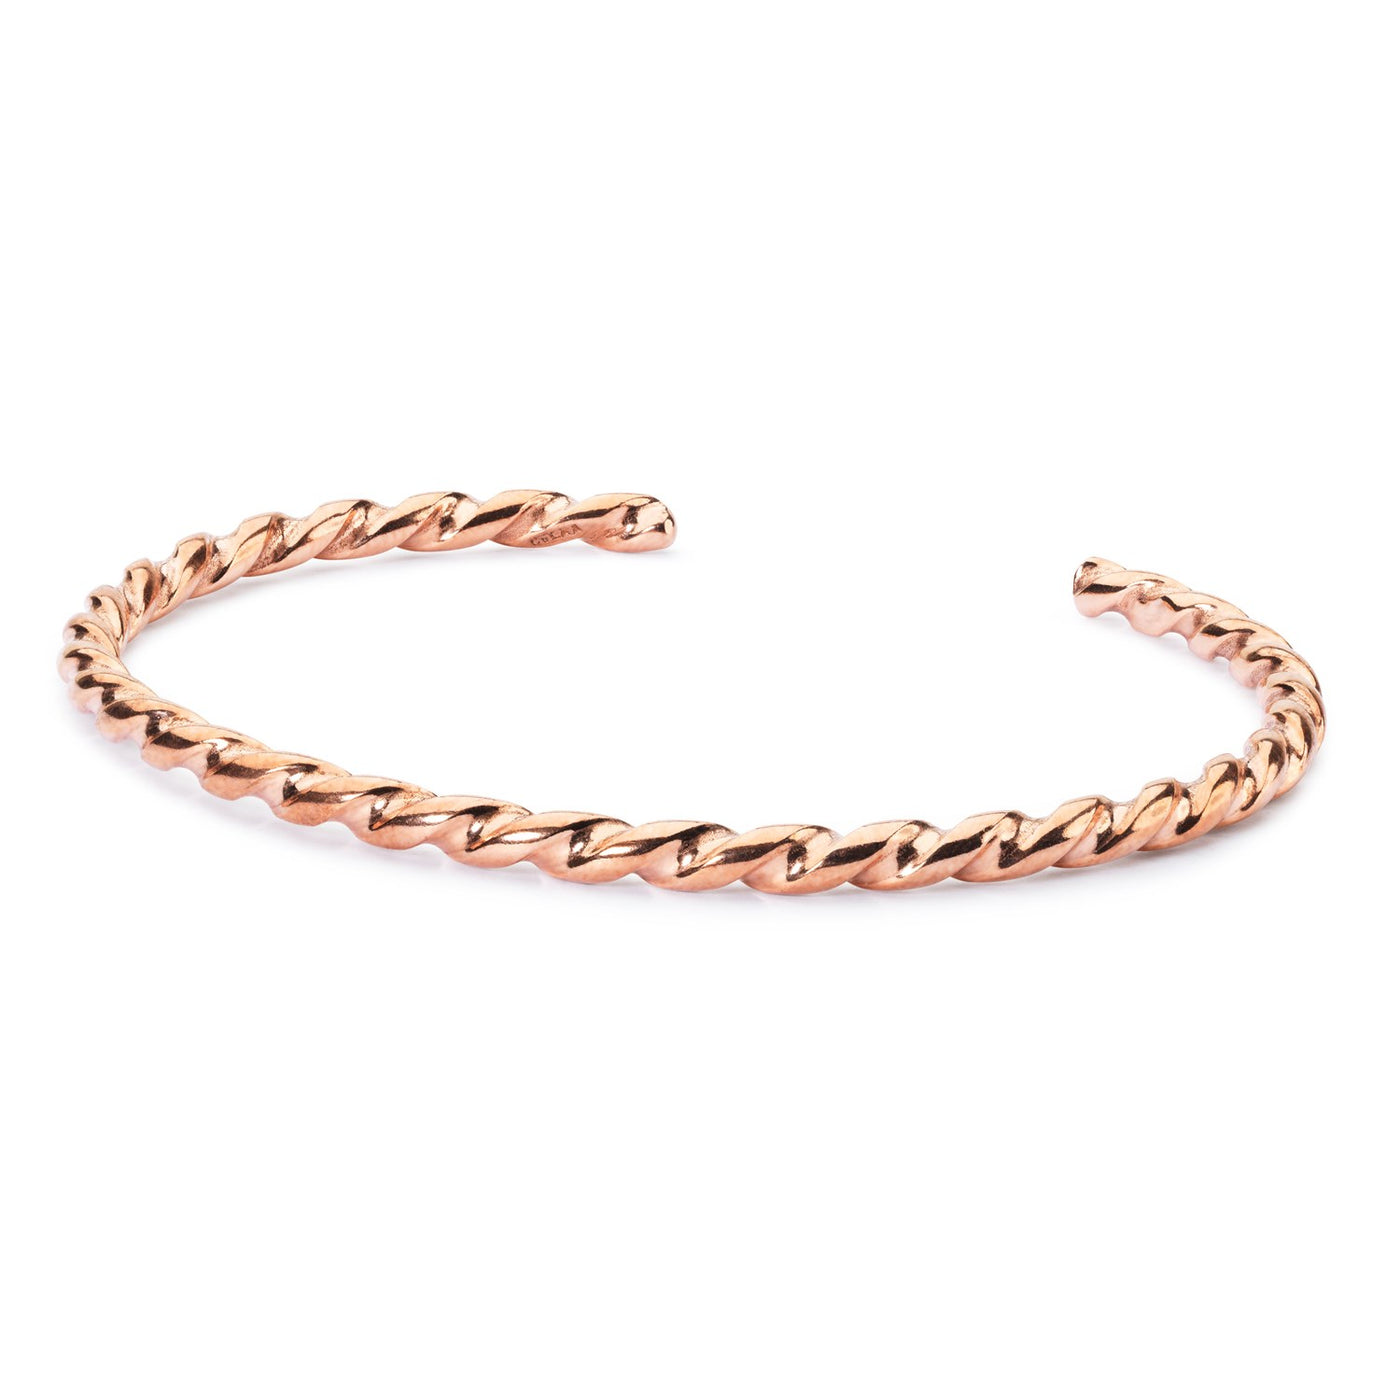 Twisted copper bangle, offering a warm and unique foundation for your Trollbeads bracelet.